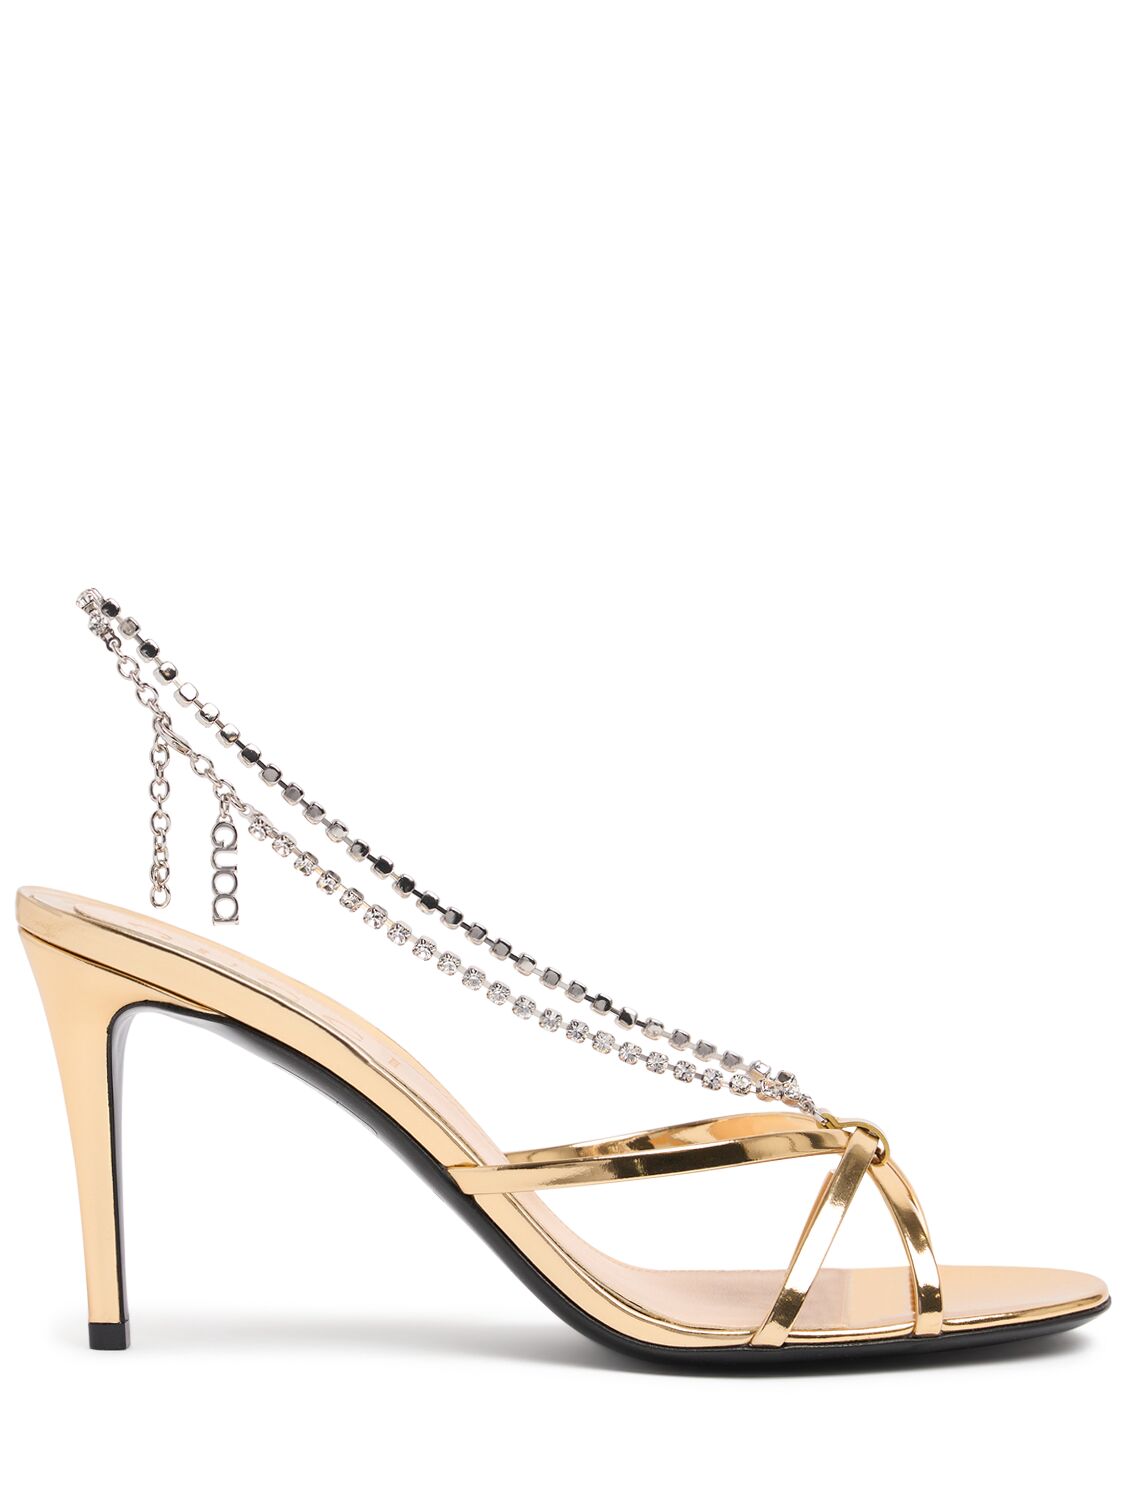 85mm Leather Sandals W/ Crystal Chain